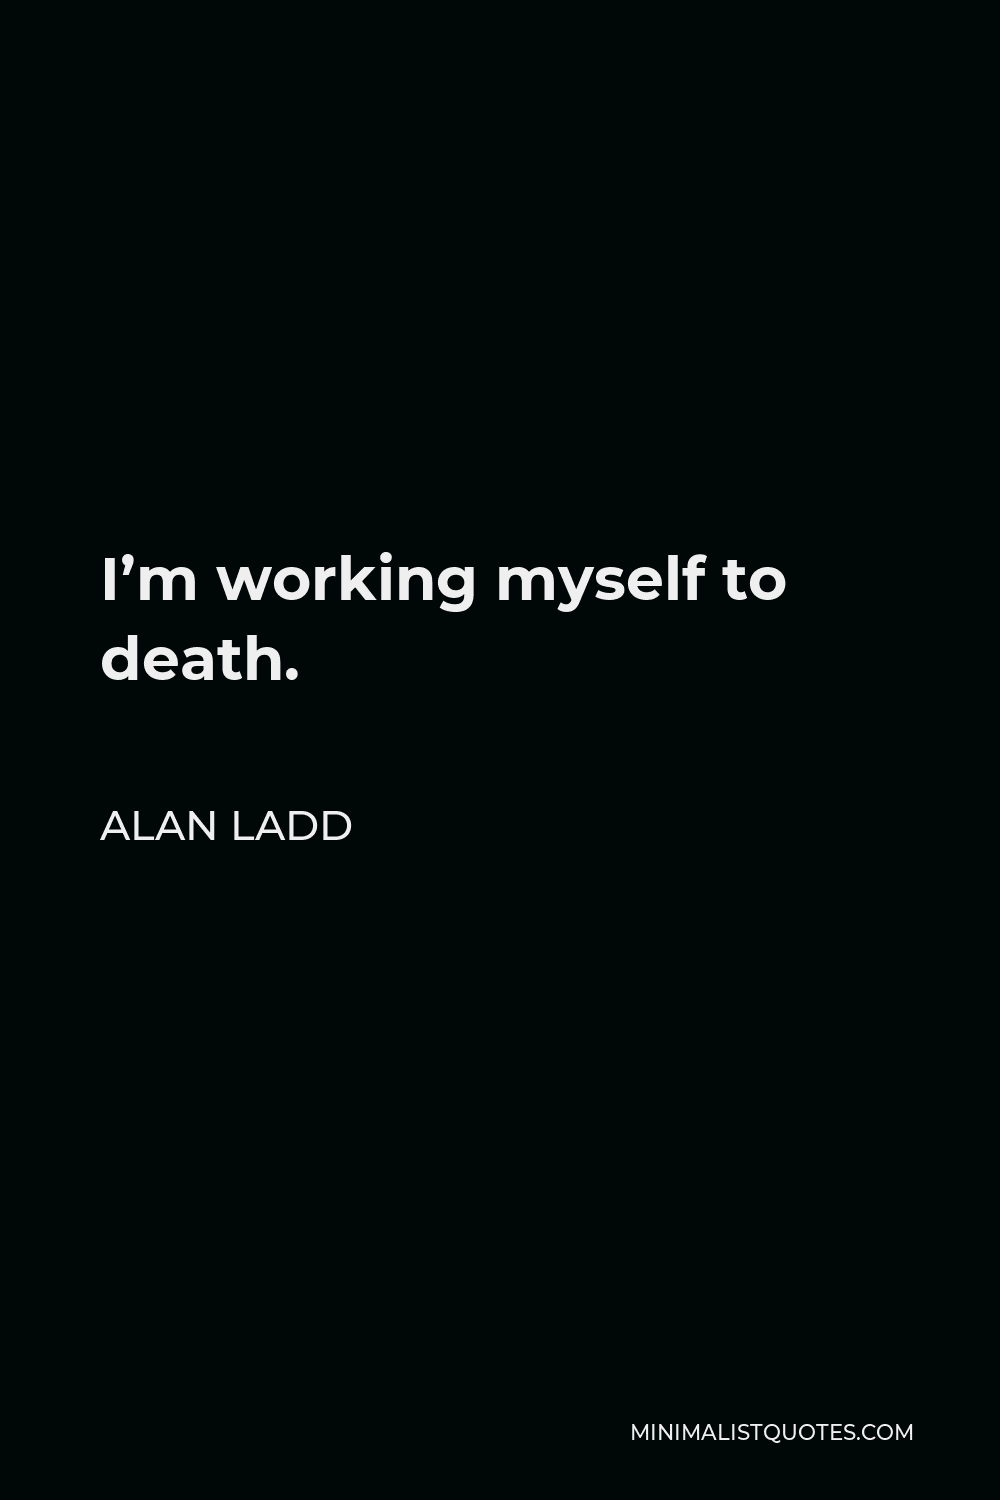 Alan Ladd Quote - I’m working myself to death.